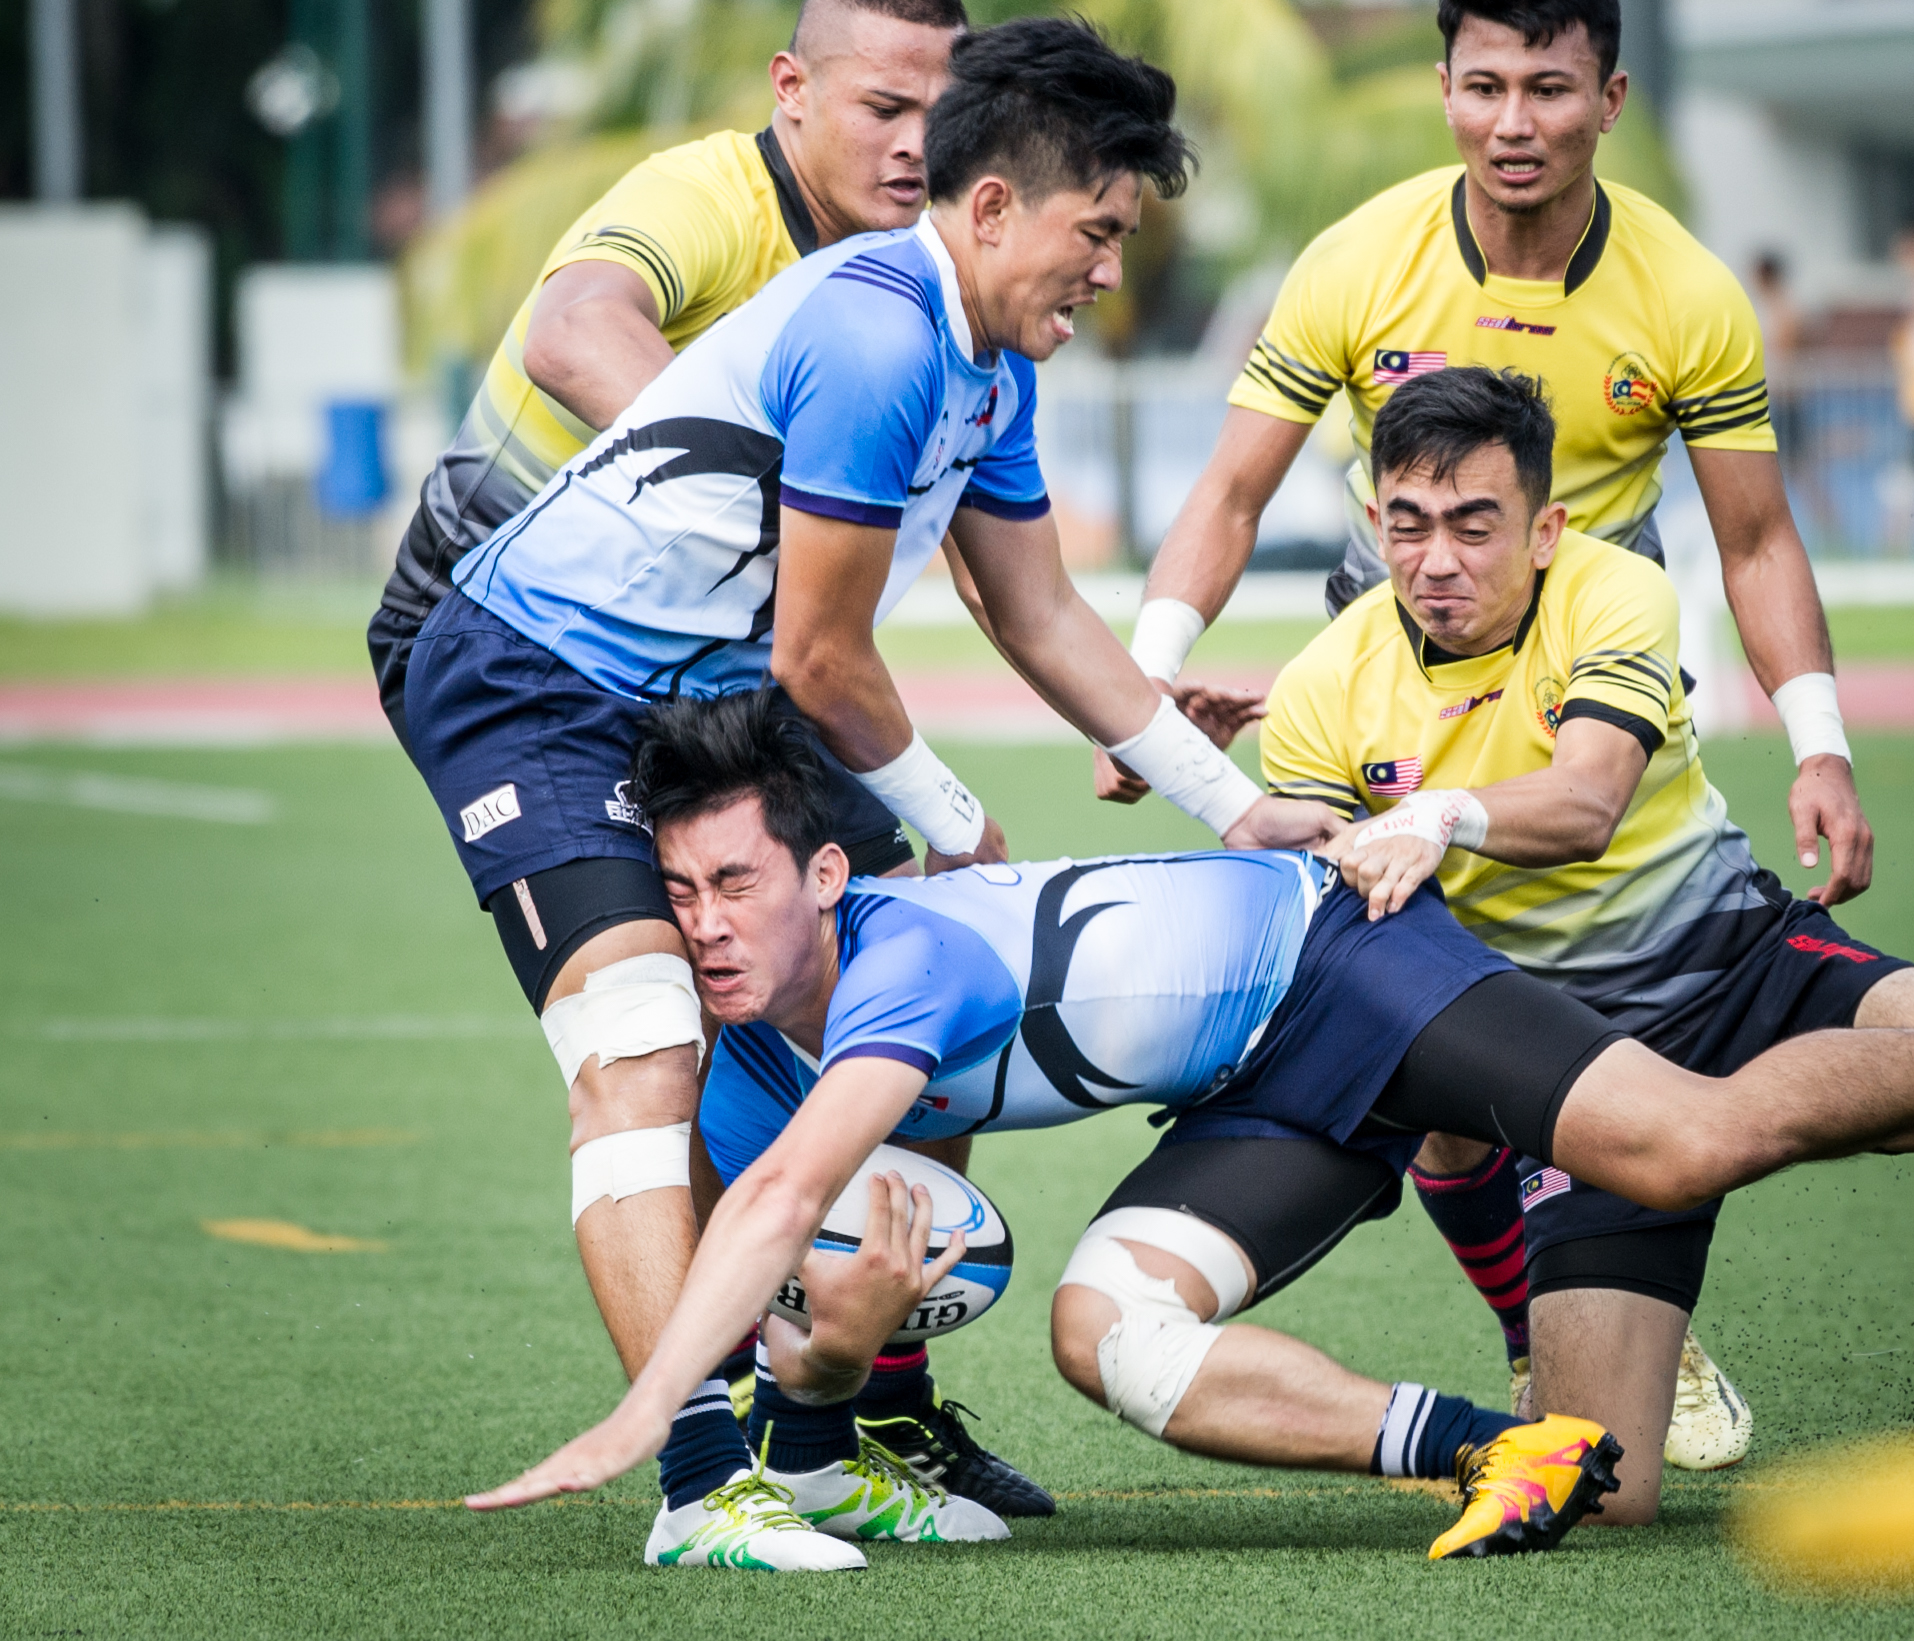 A Laotian player is tackled during the rugby competition of the ASEAN University Games at the Nanyang Technological University.